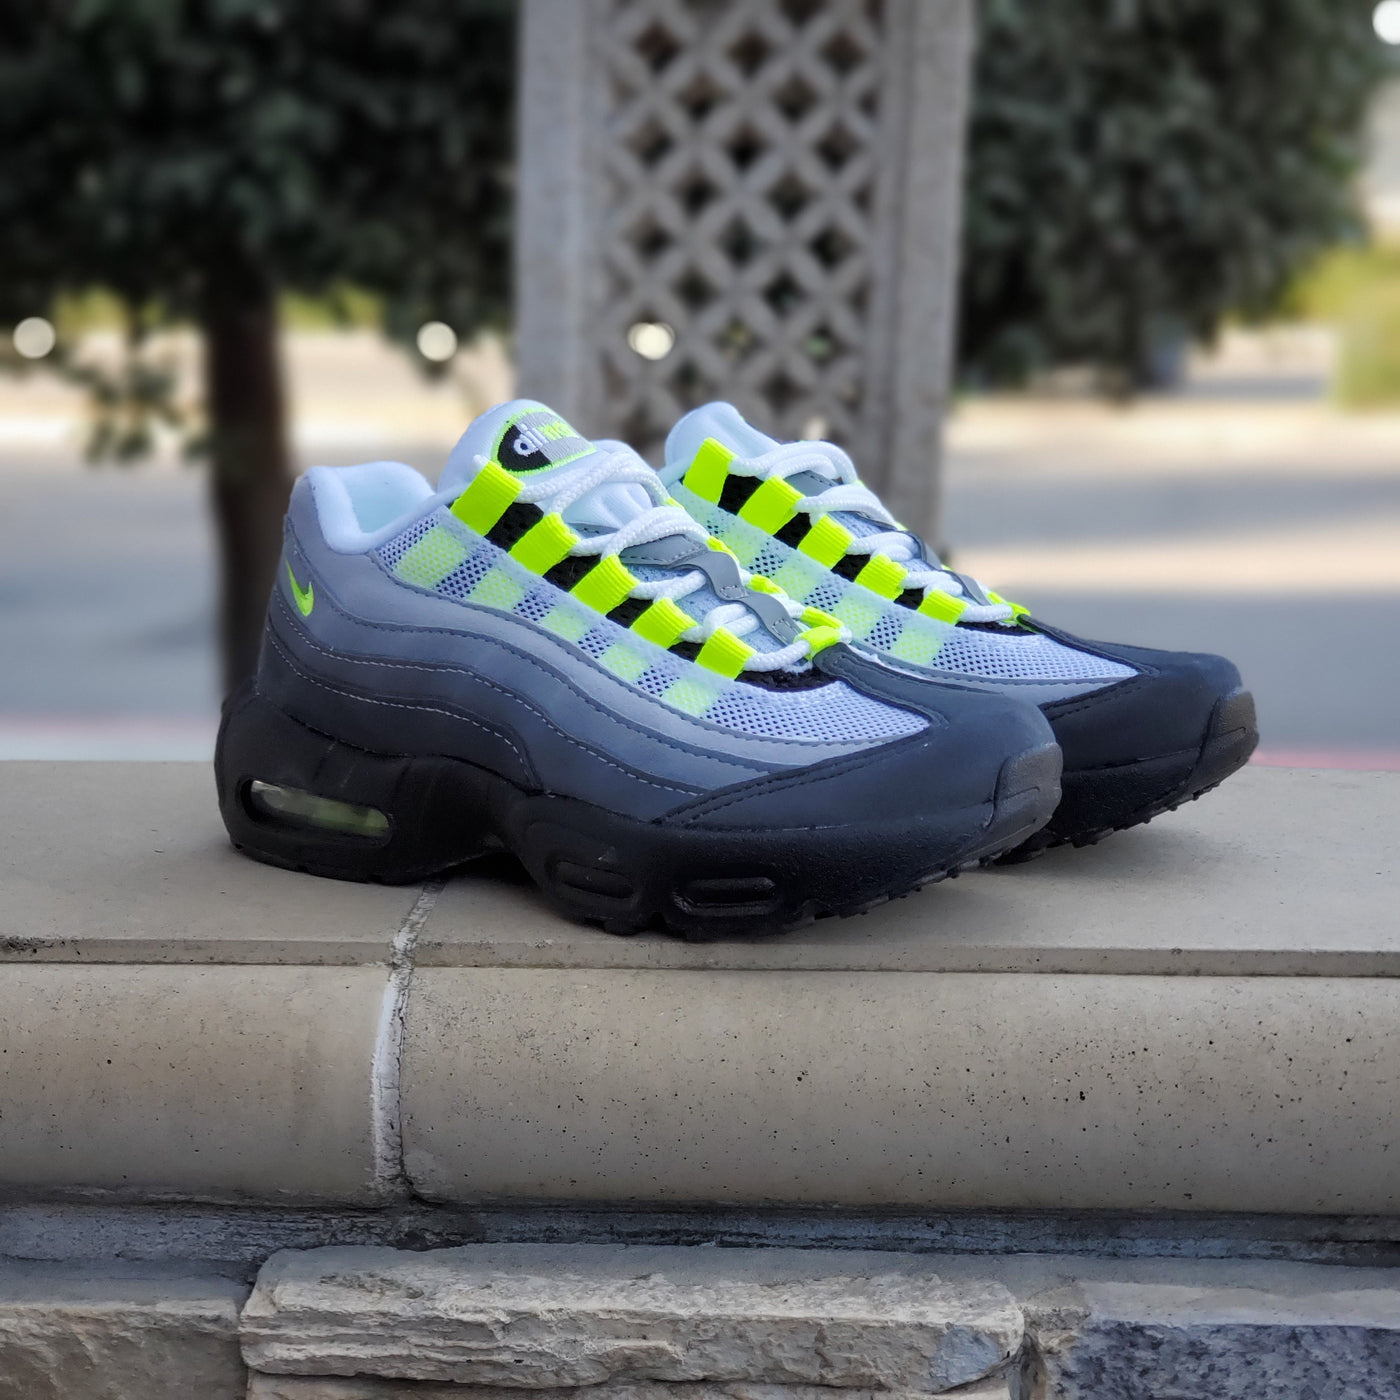 NIKE AIR MAX 95 OG PS NEON